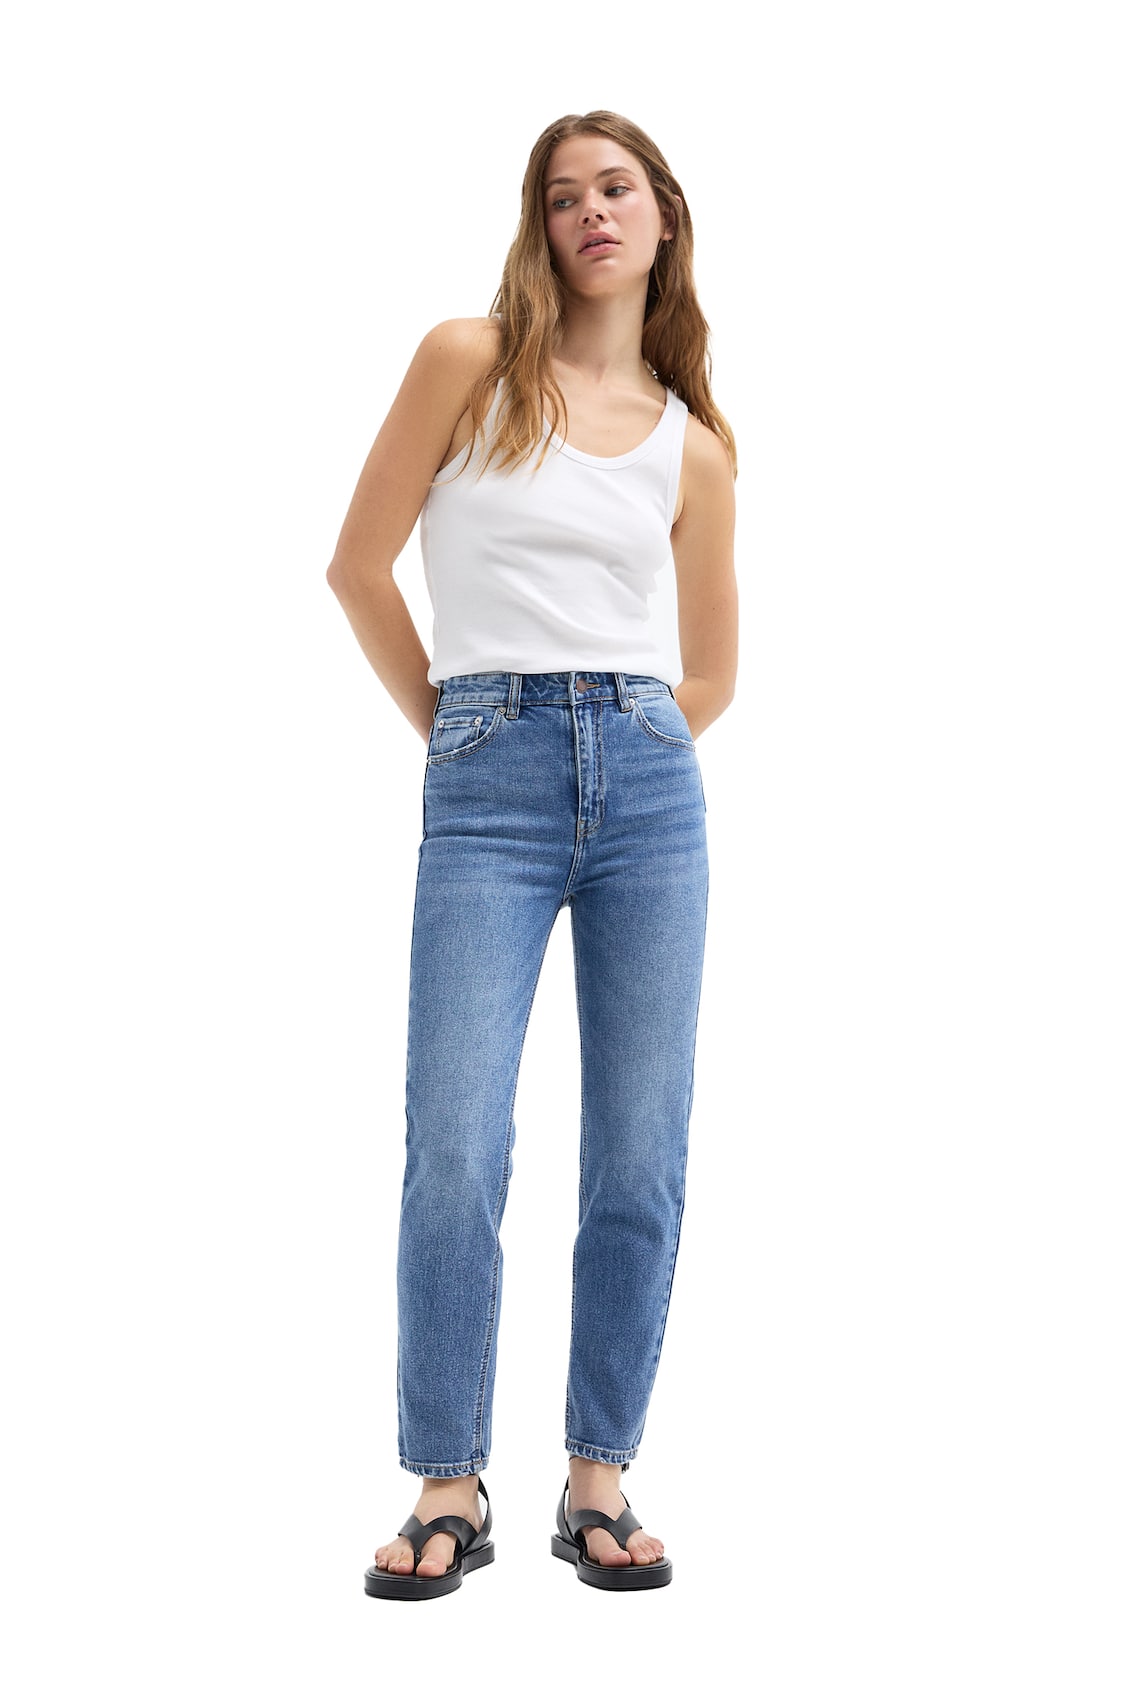 Old Navy — Mid-Rise Boyfriend White Jeans For Women • Jeans blancos para  mujer •